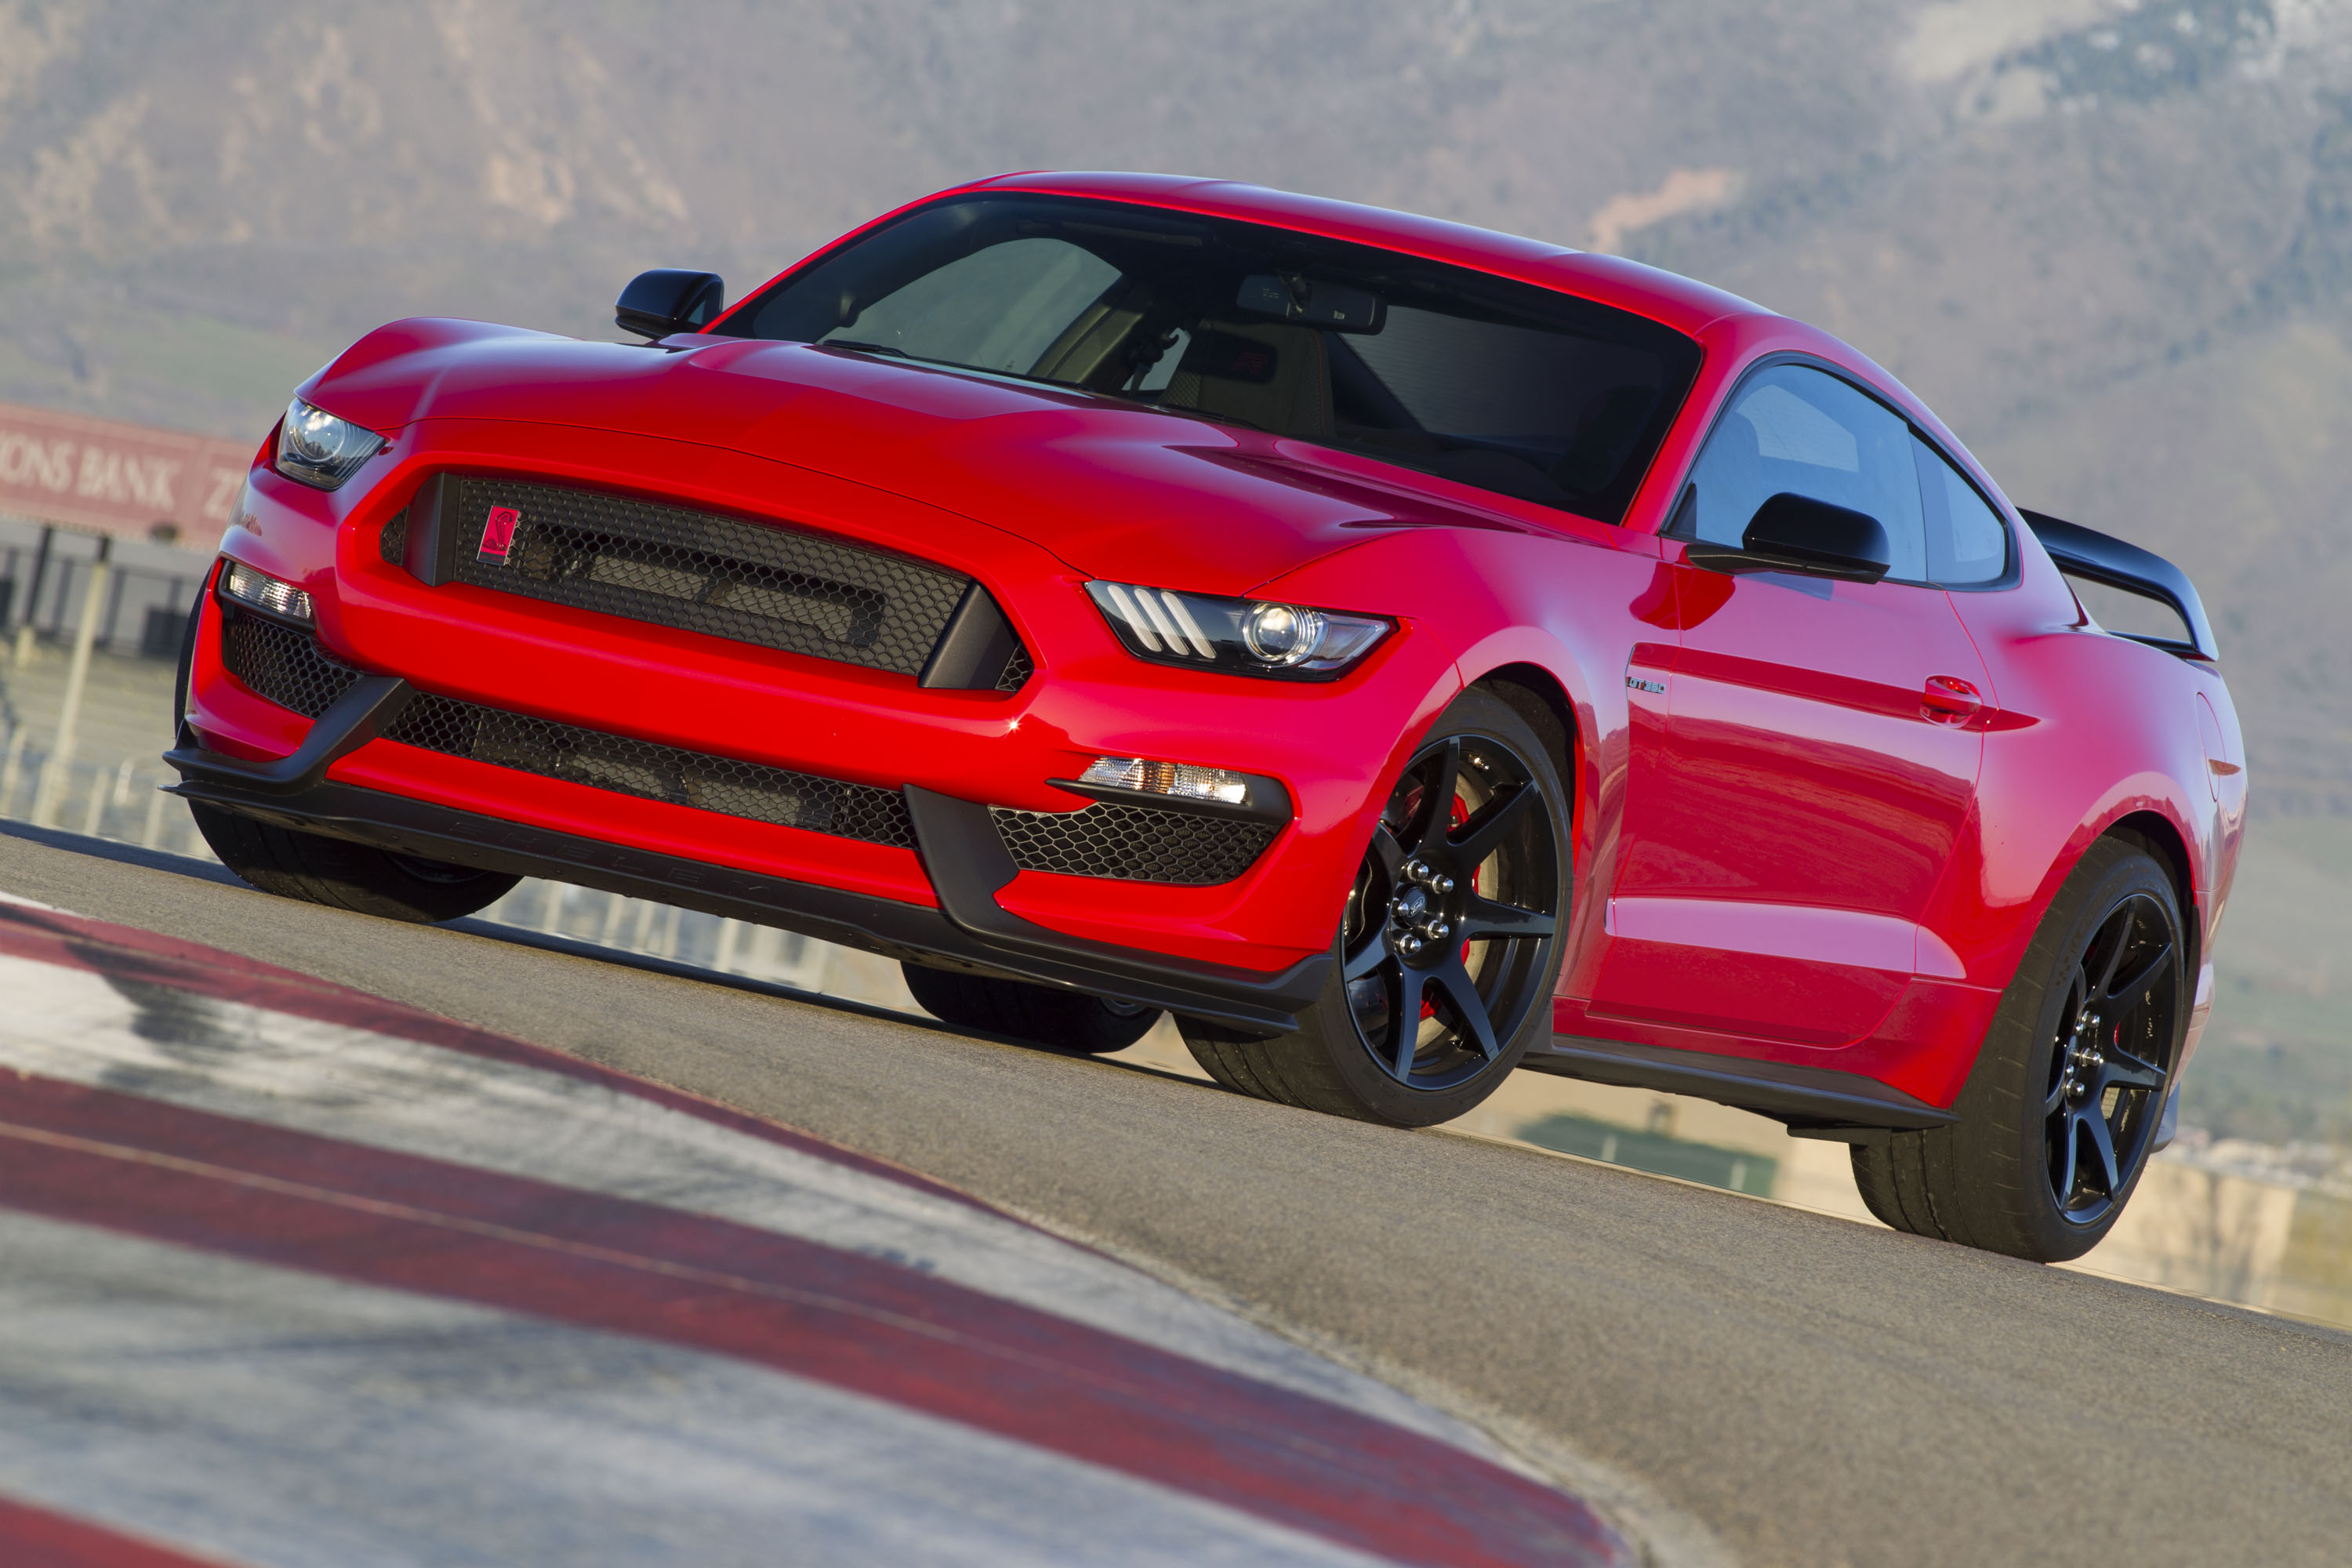 Red Mustang Shelby Gt350r - 3000x2000 Wallpaper 